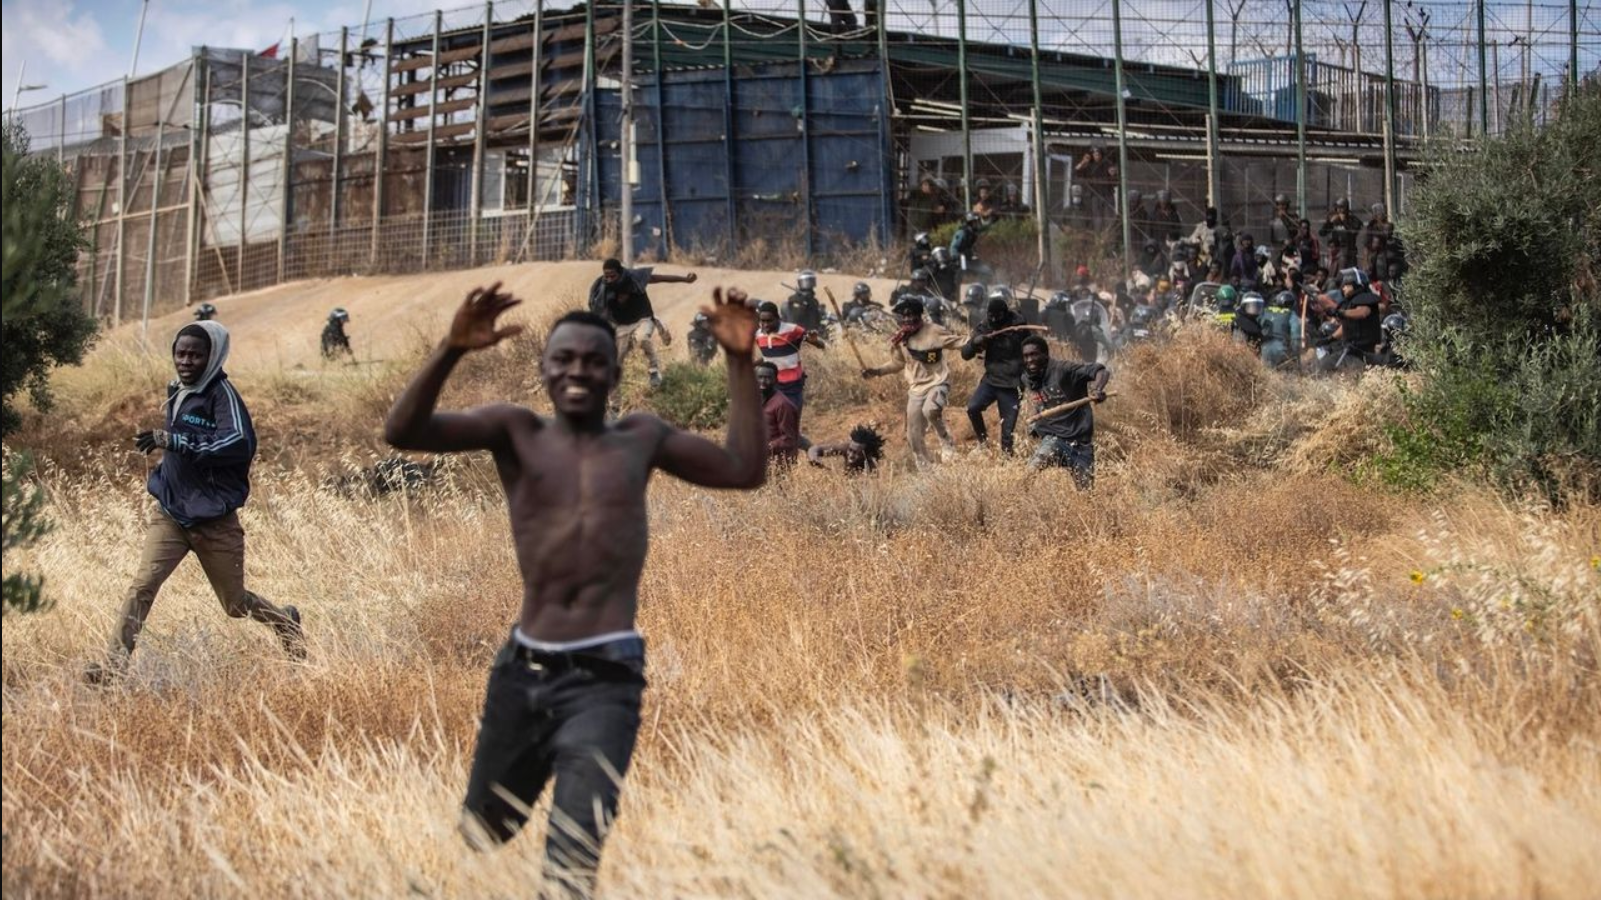 AU urges probe into deaths of Africans at Spain-Morocco border